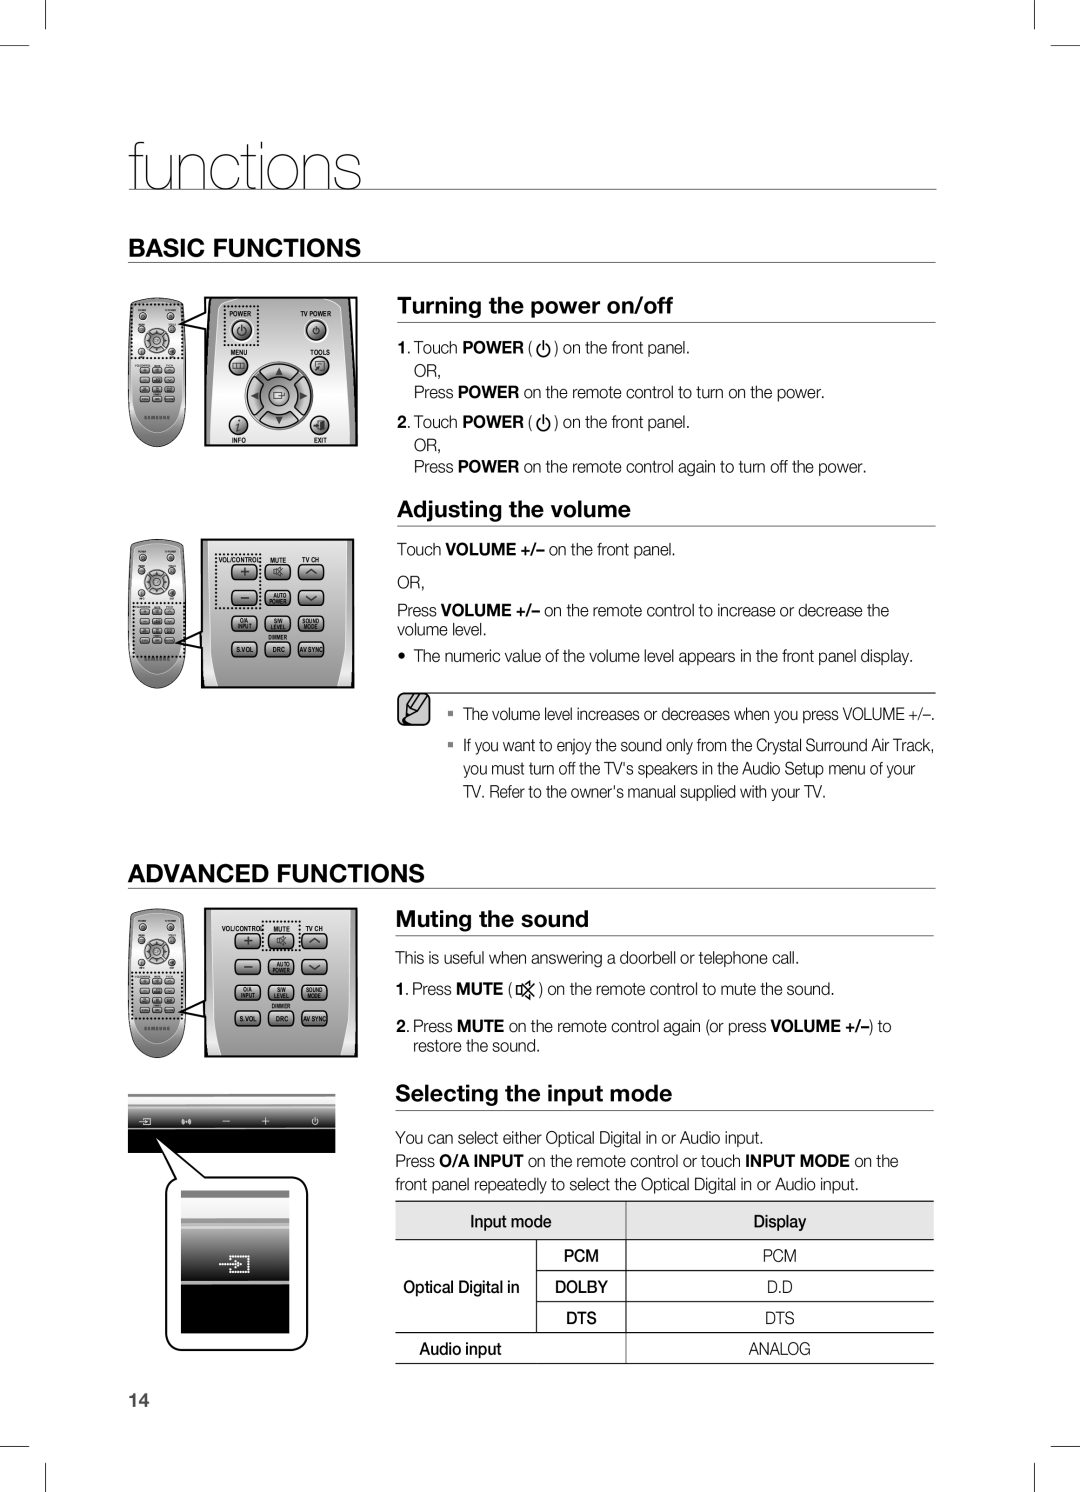 Samsung AH68-02273S, HW-C451 basic functions, advanced functions, Turning the power on/off, Adjusting the volume 